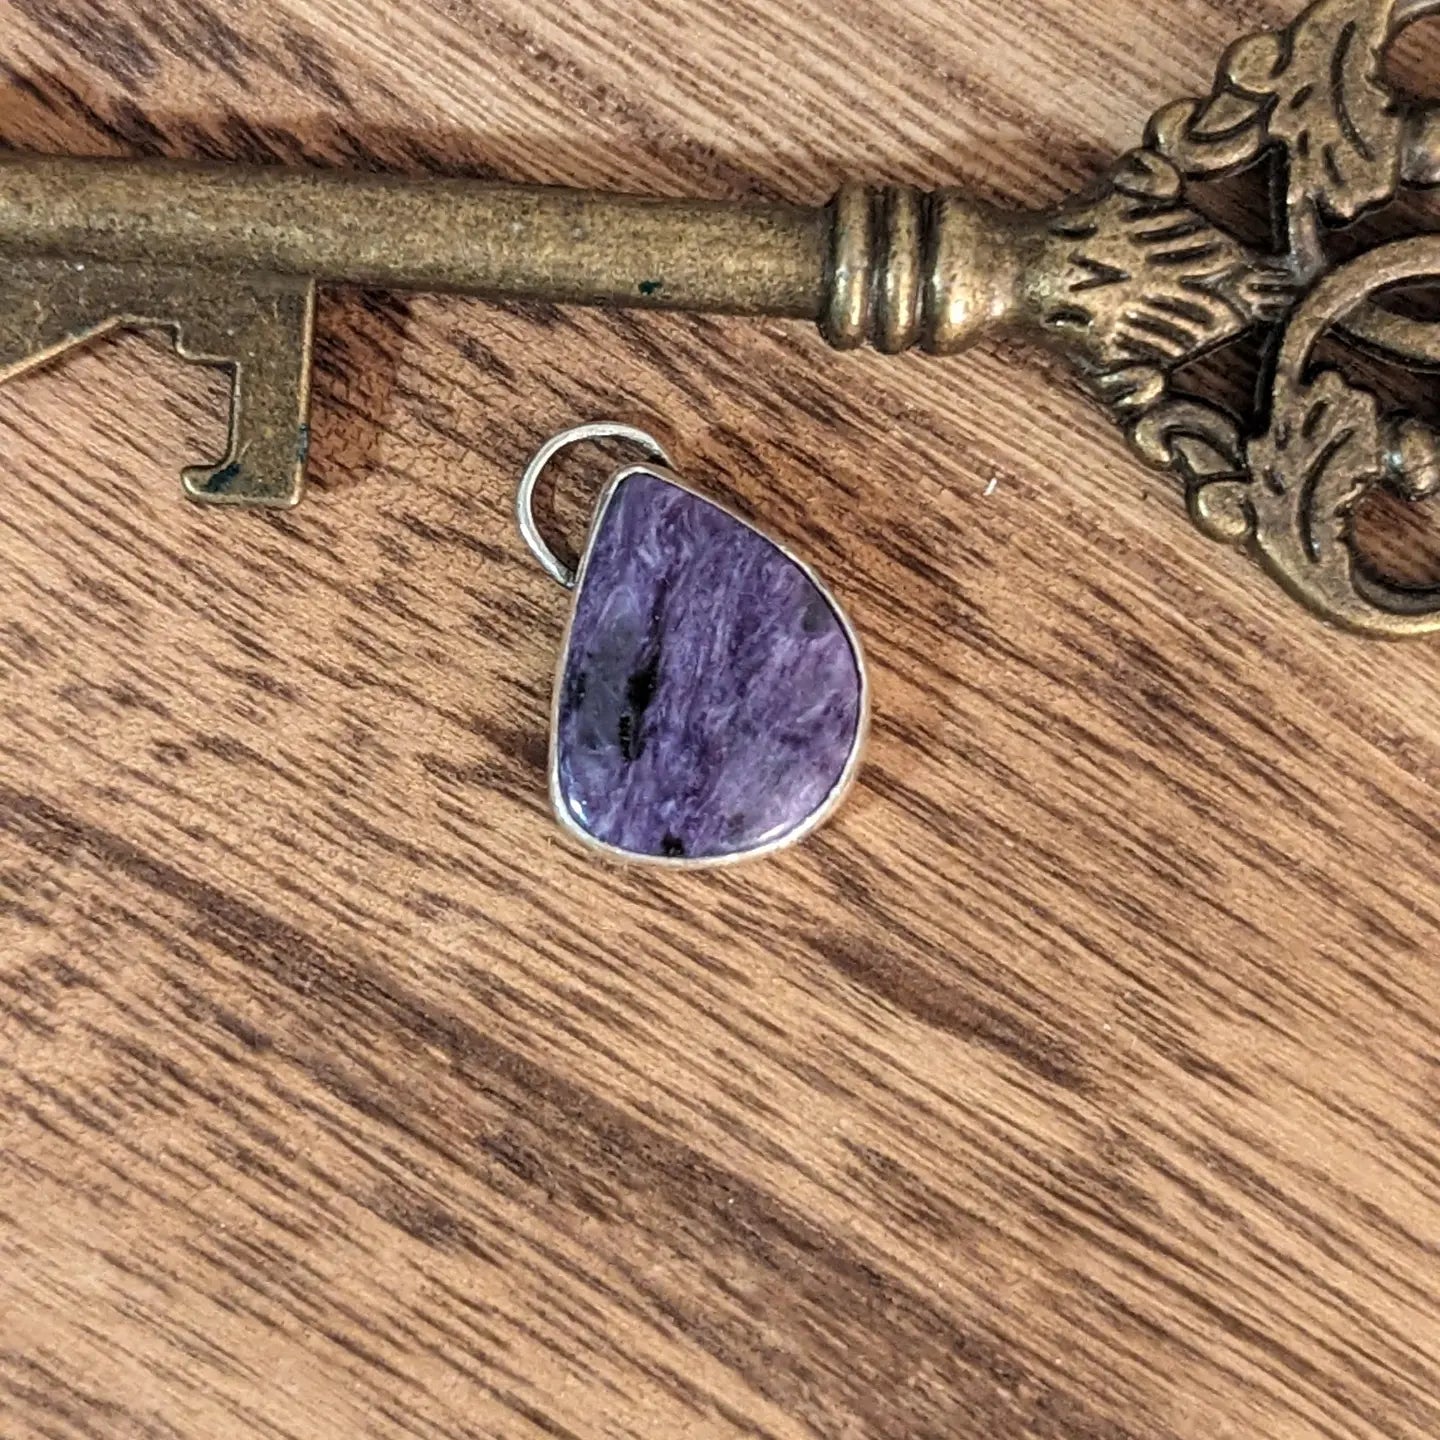 A silver pendant with a solitary purple swirling charoite stone in an almost teardrop shape with one flat side sits with a large brass key.